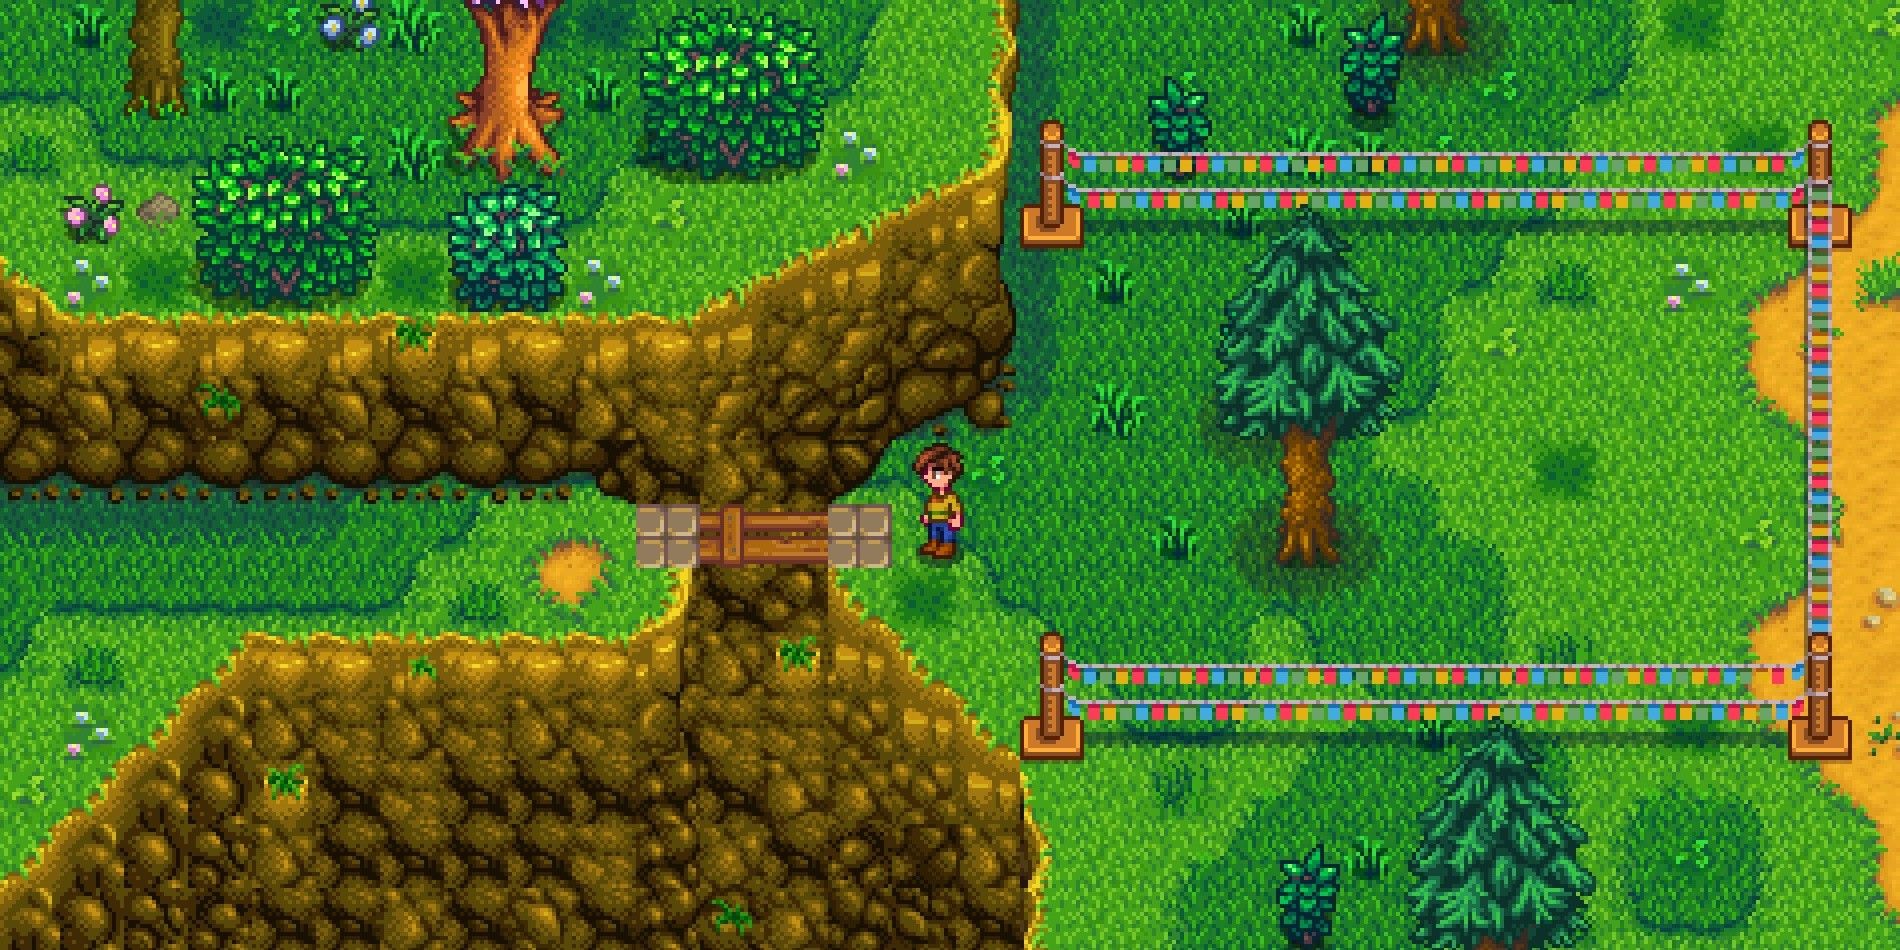 Where & What Is The Flower Dance In Stardew Valley 1.6?